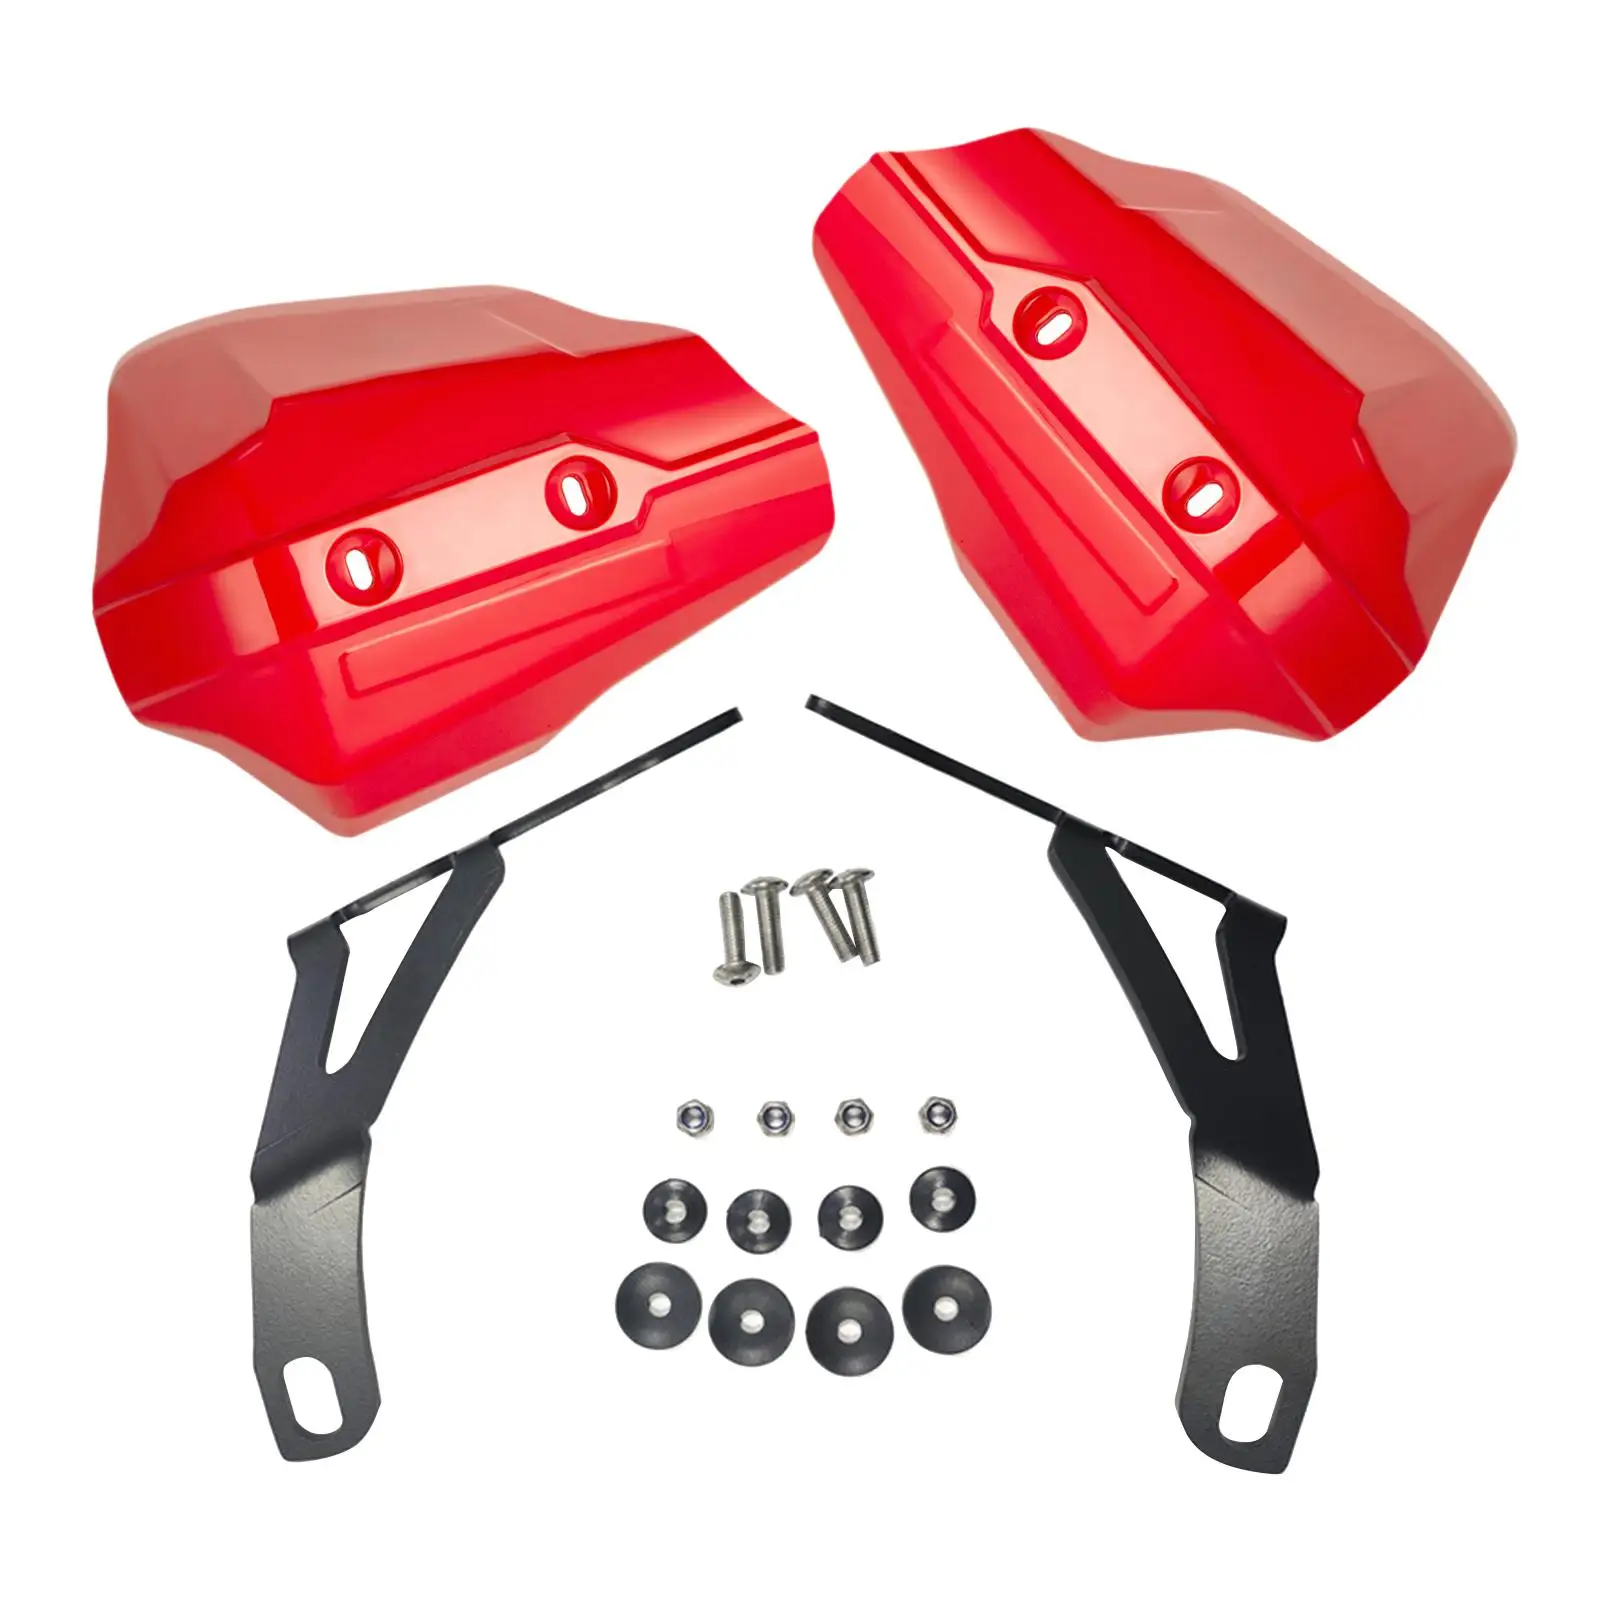 2Pcs Motorcycle Hand Guards Wind Protector with Metal Bracket Replacement